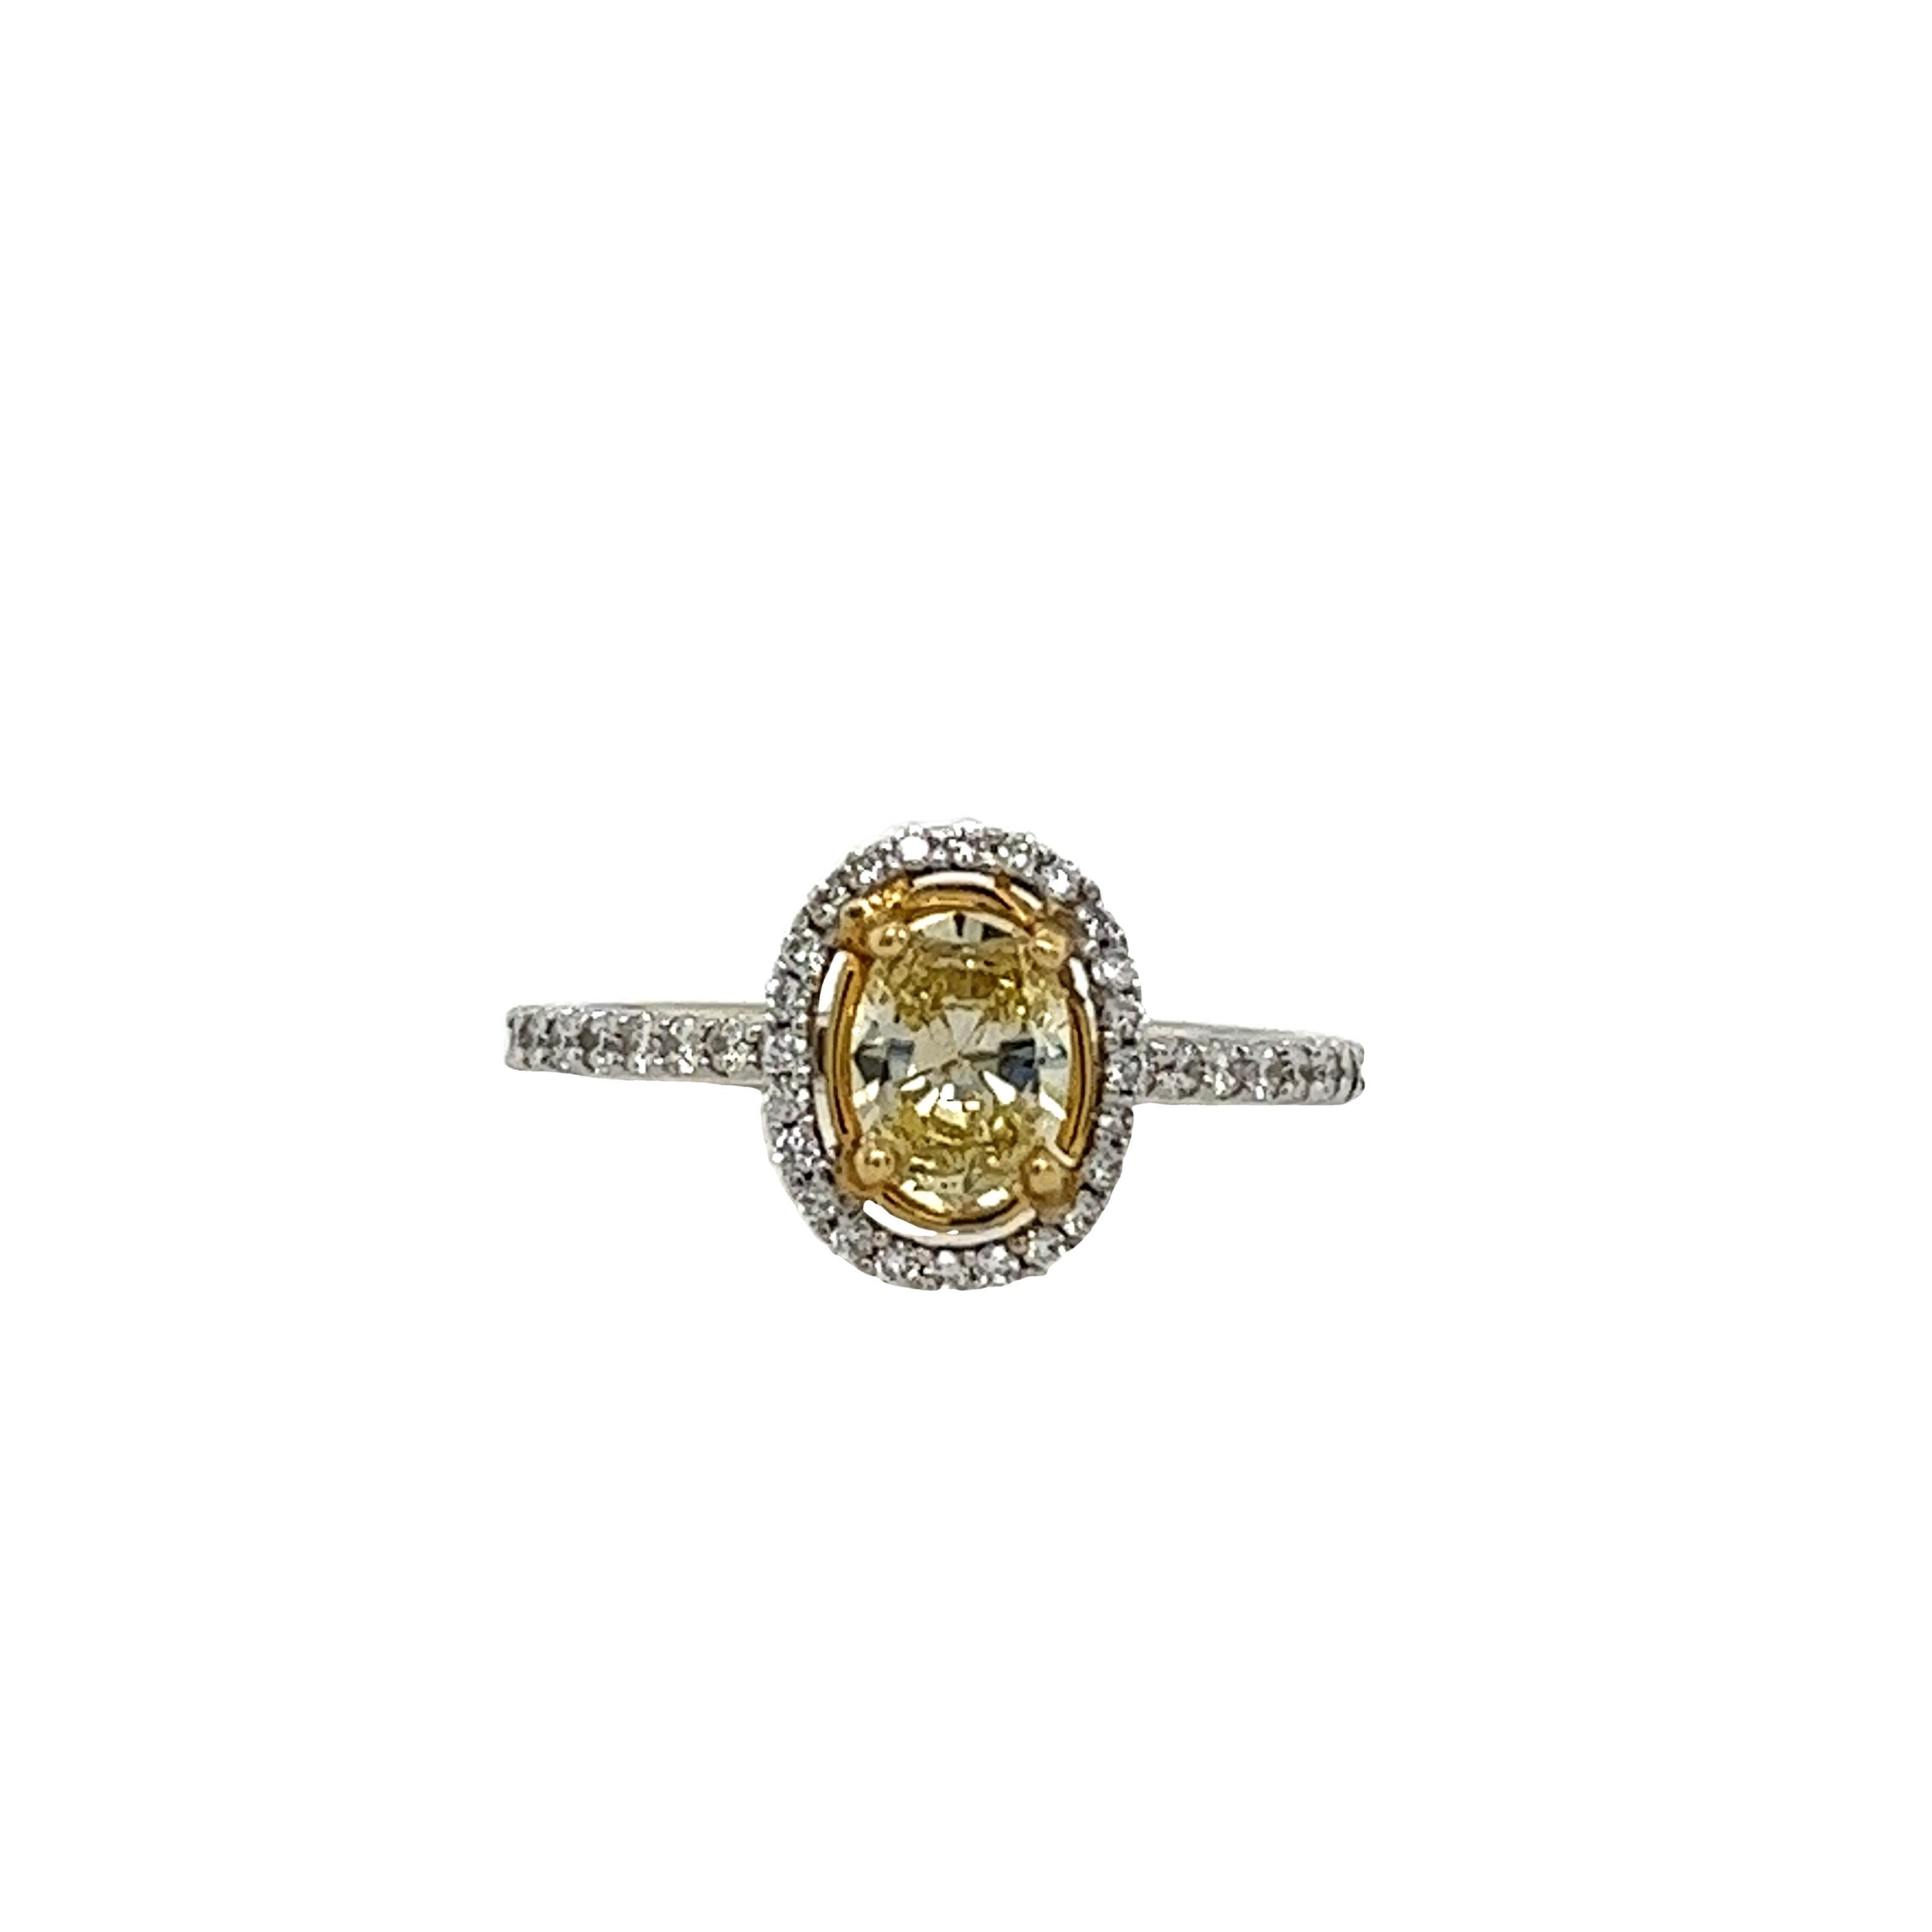 Oval Cut 18ct White & Yellow Gold Ring Set With 0.63ct Fancy Yellow SI1 Oval Diamond For Sale